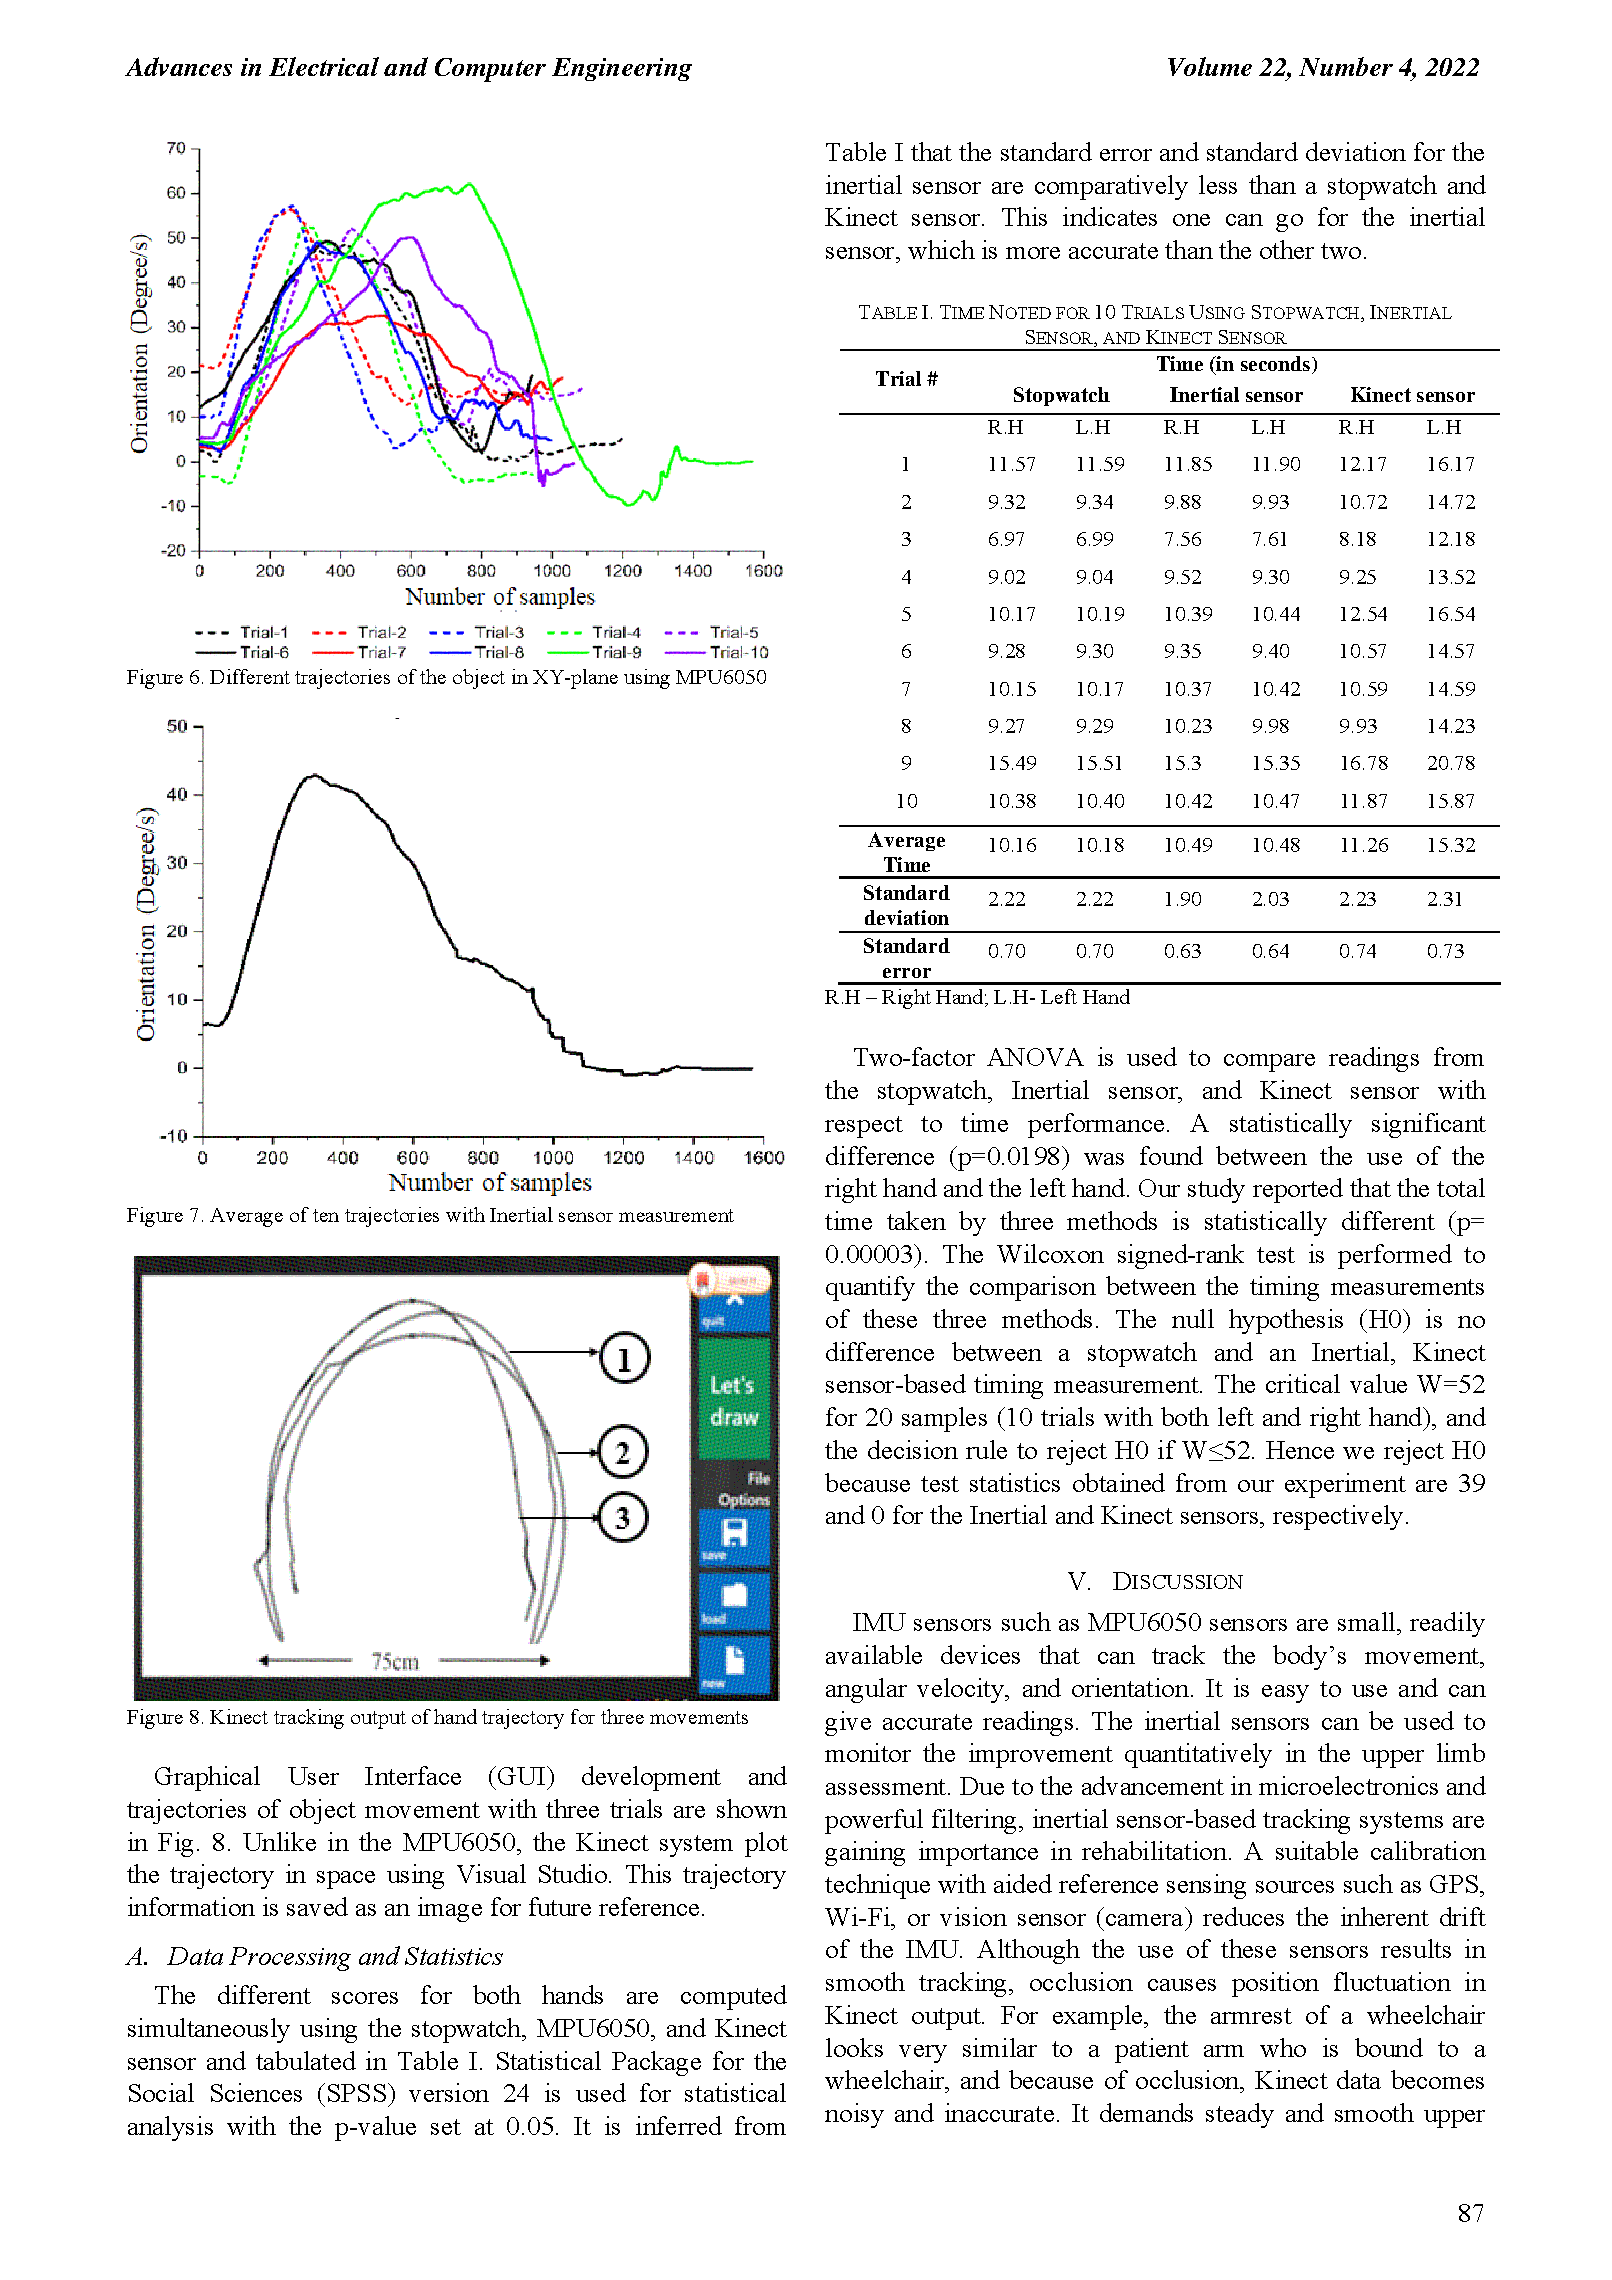 PDF Quickview for paper with DOI:10.4316/AECE.2022.04010